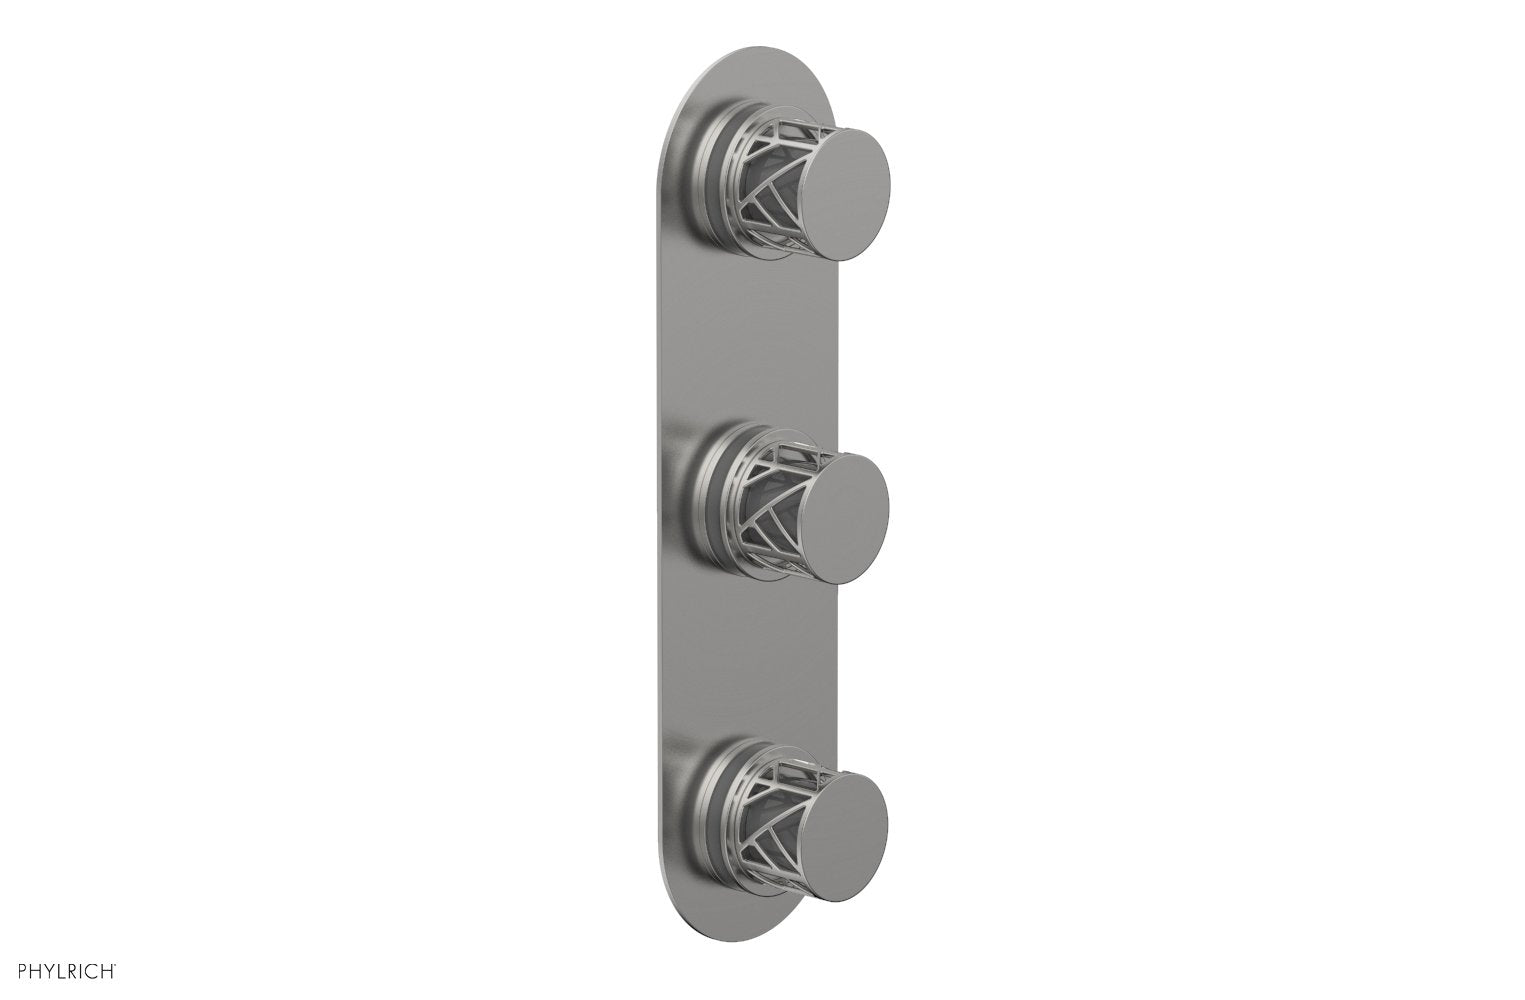 Phylrich JOLIE Thermostatic Valve with Two Volume Control with "Grey" Accents